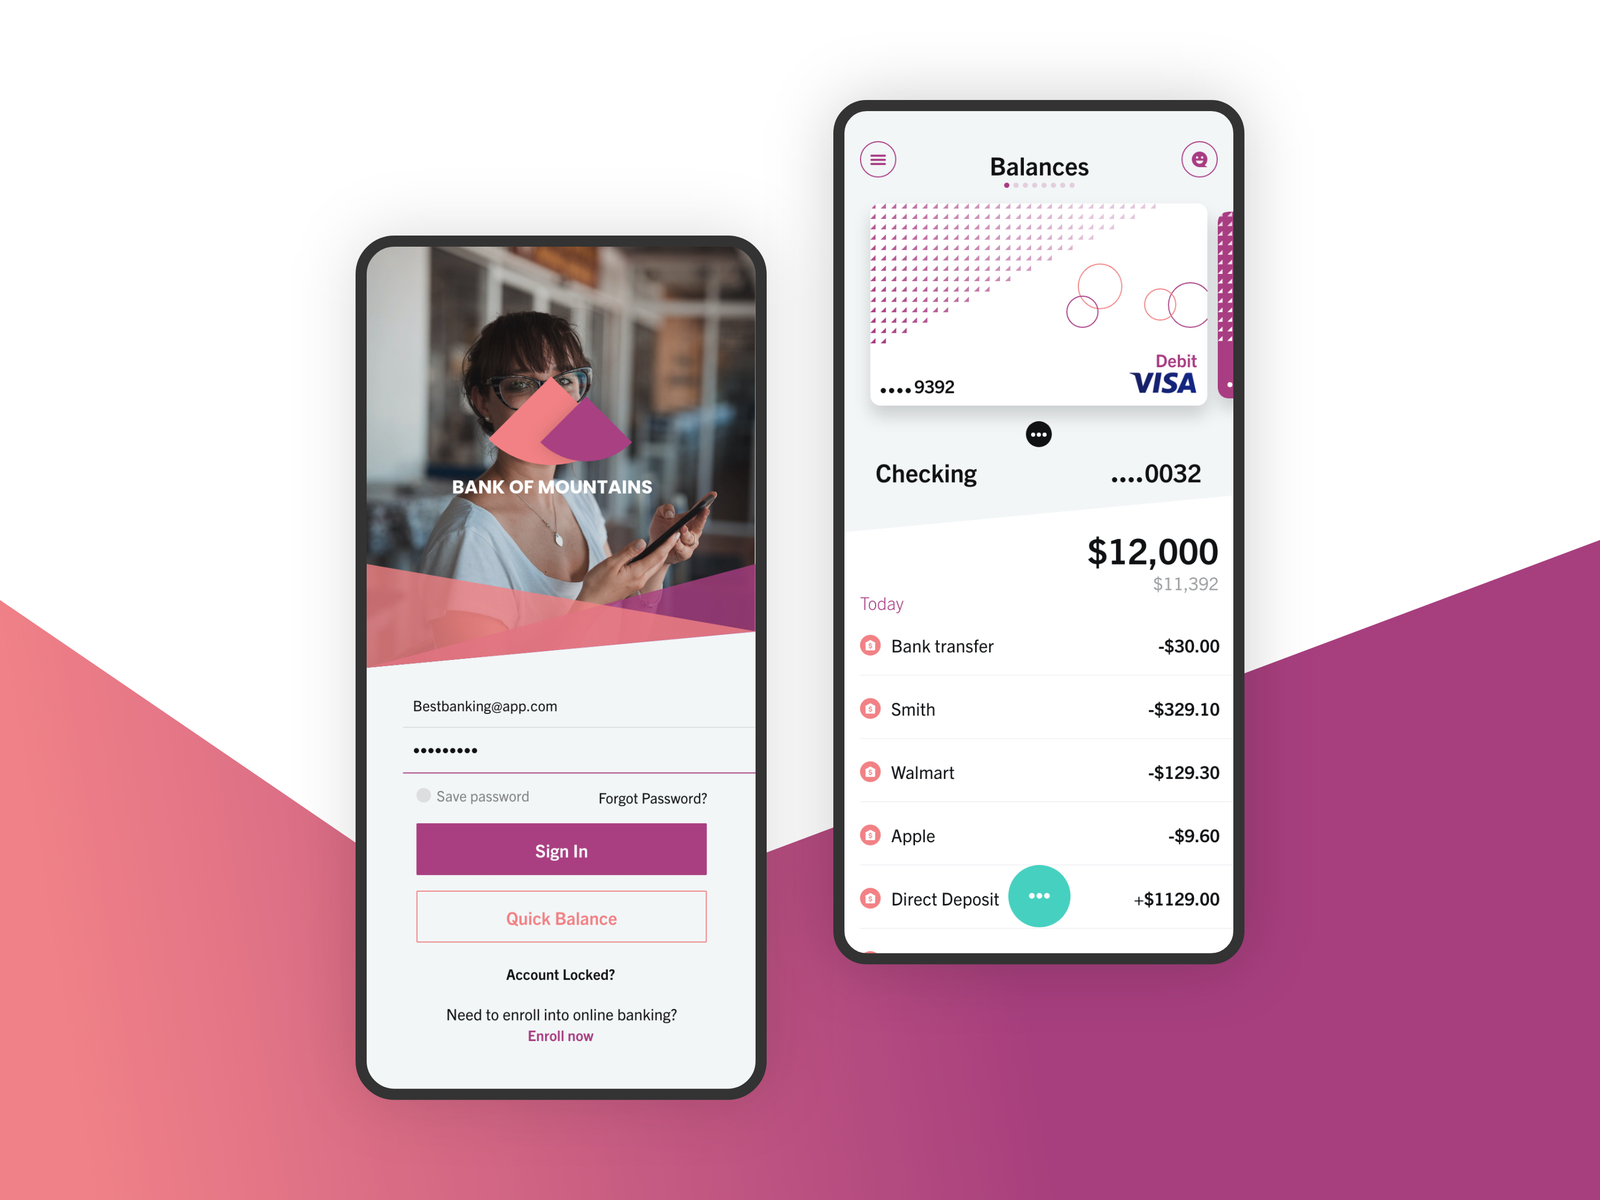 Banking App UI by Chris Cannon on Dribbble